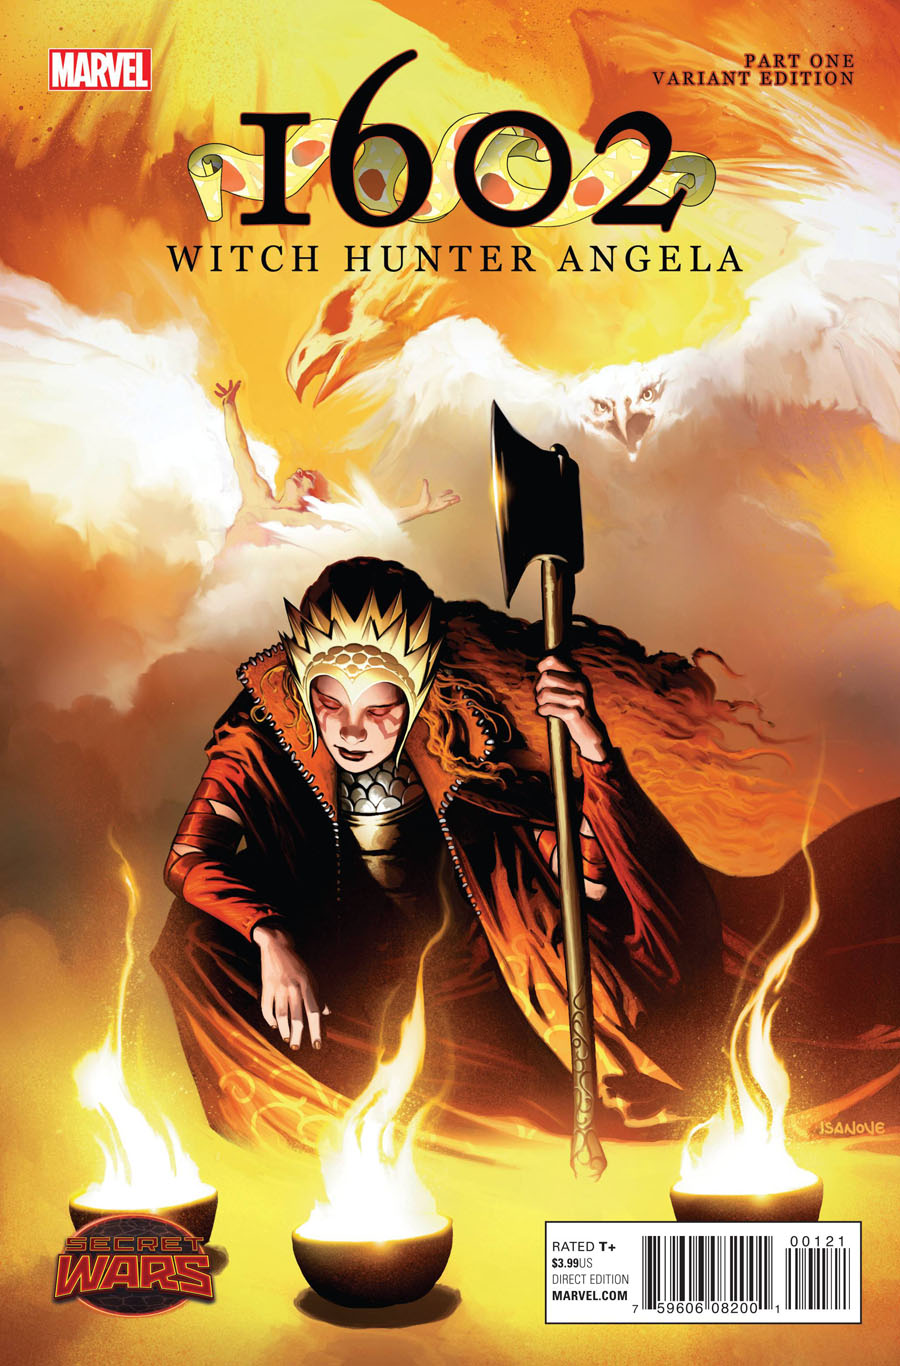 1602 Witch Hunter Angela #1 Cover C Incentive Richard Isanove Variant Cover (Secret Wars Warzones Tie-In)